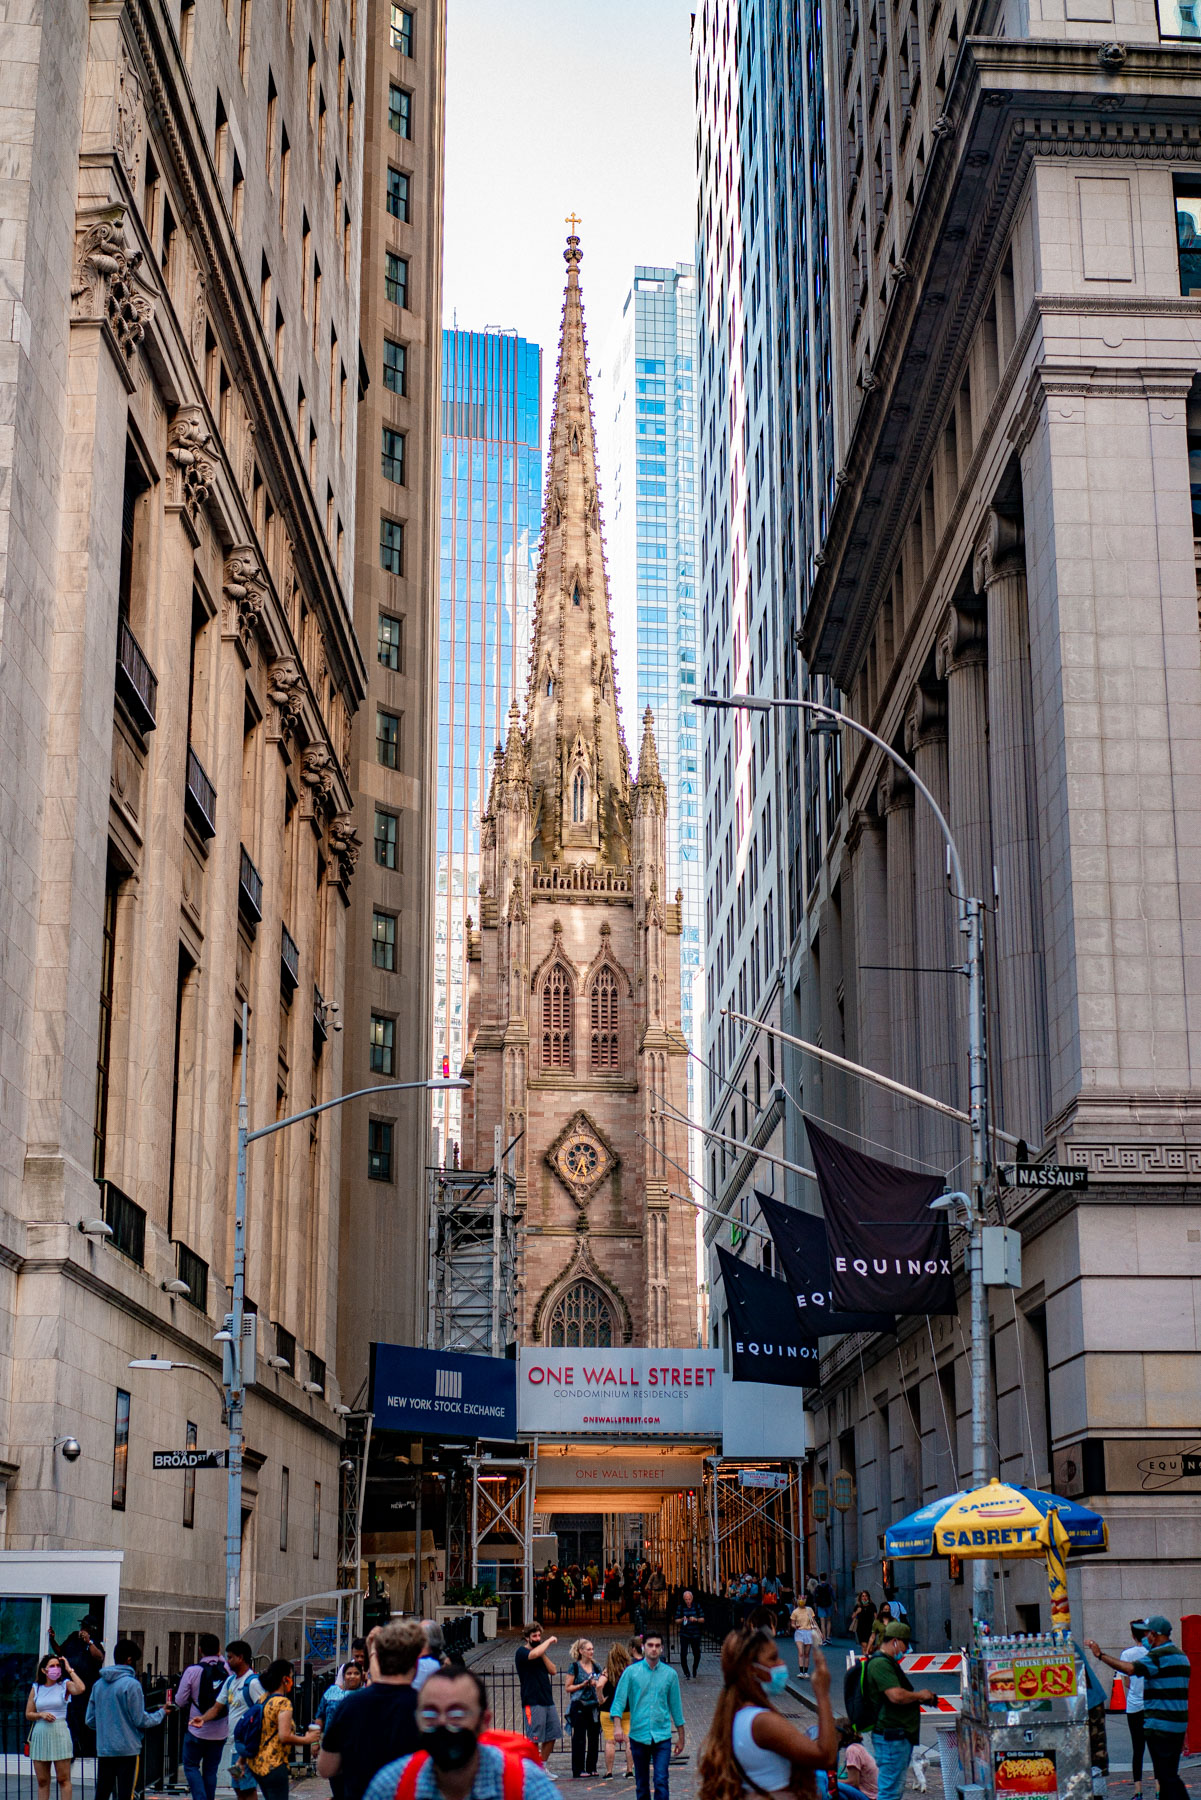 Trinity Church nYC
Most famous churches in New York City